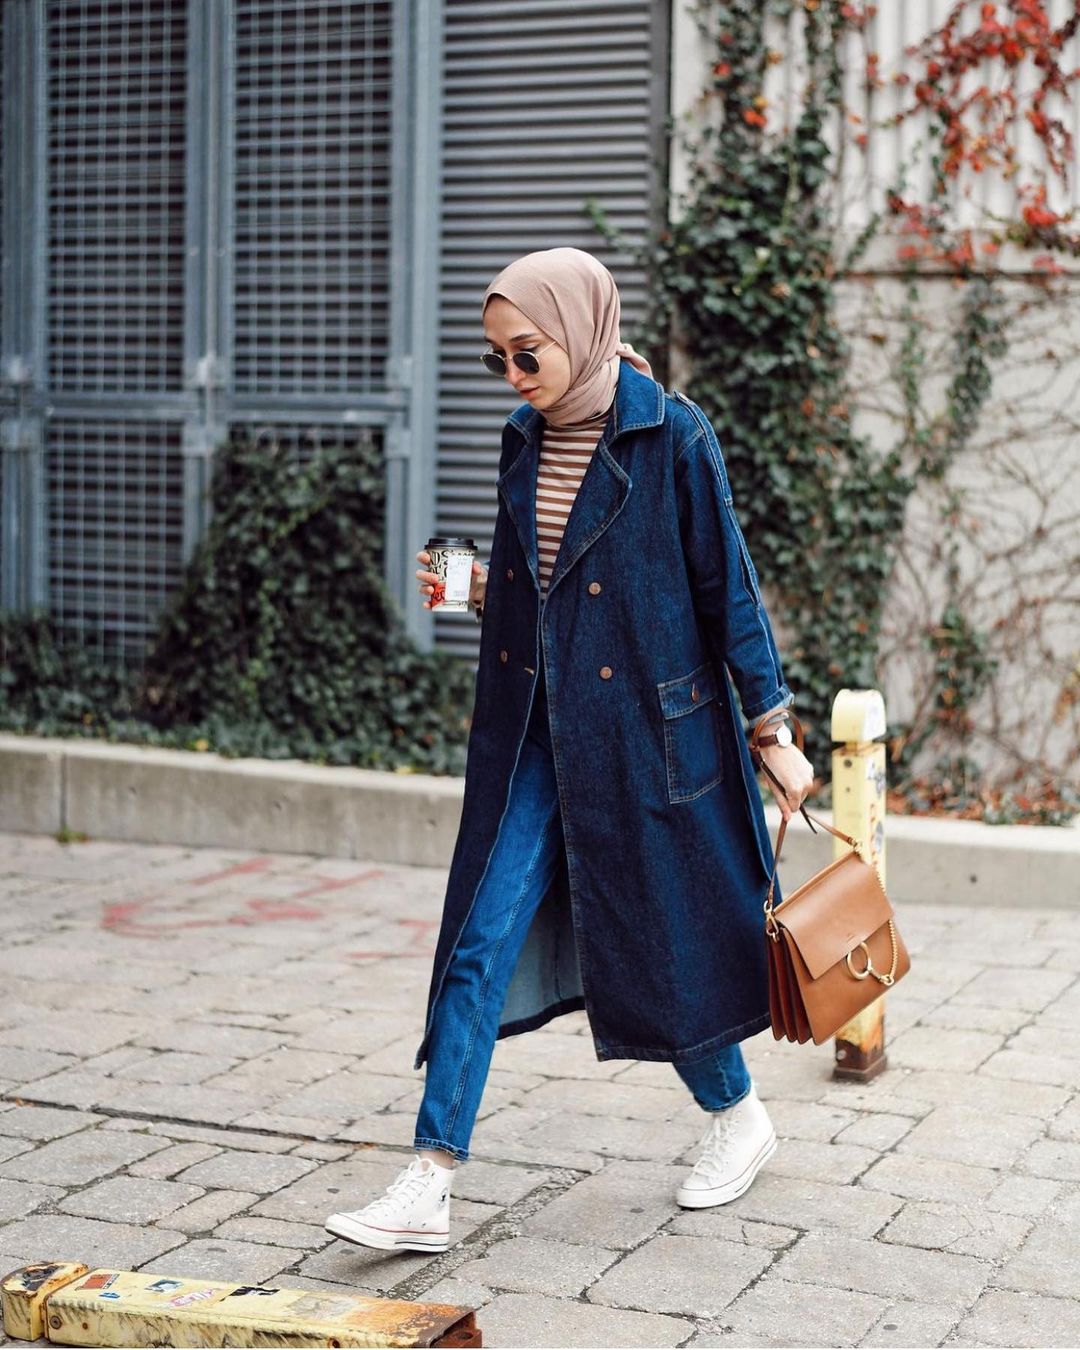 Spring Denim Trends That Hijabi Should Try in 2022 